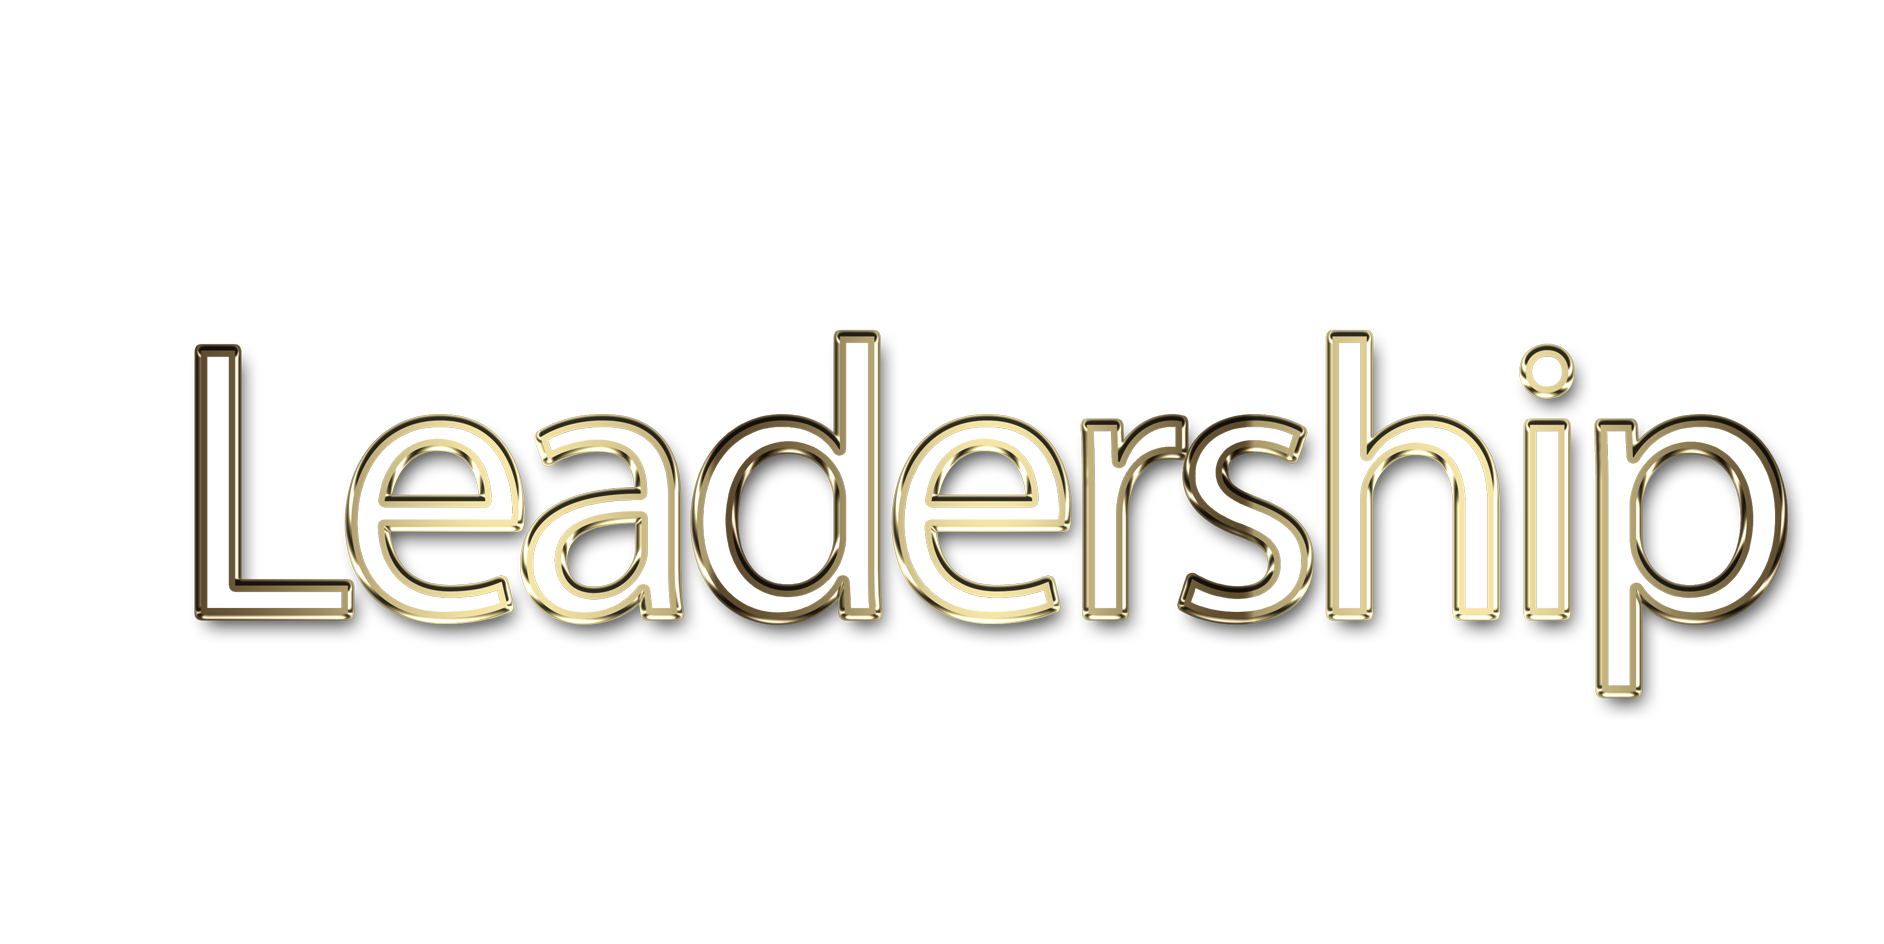 Leadership png, word Leadership png, Leadership word png, Leadership text png, Leadership letters png, Leadership word art typography PNG images, transparent png